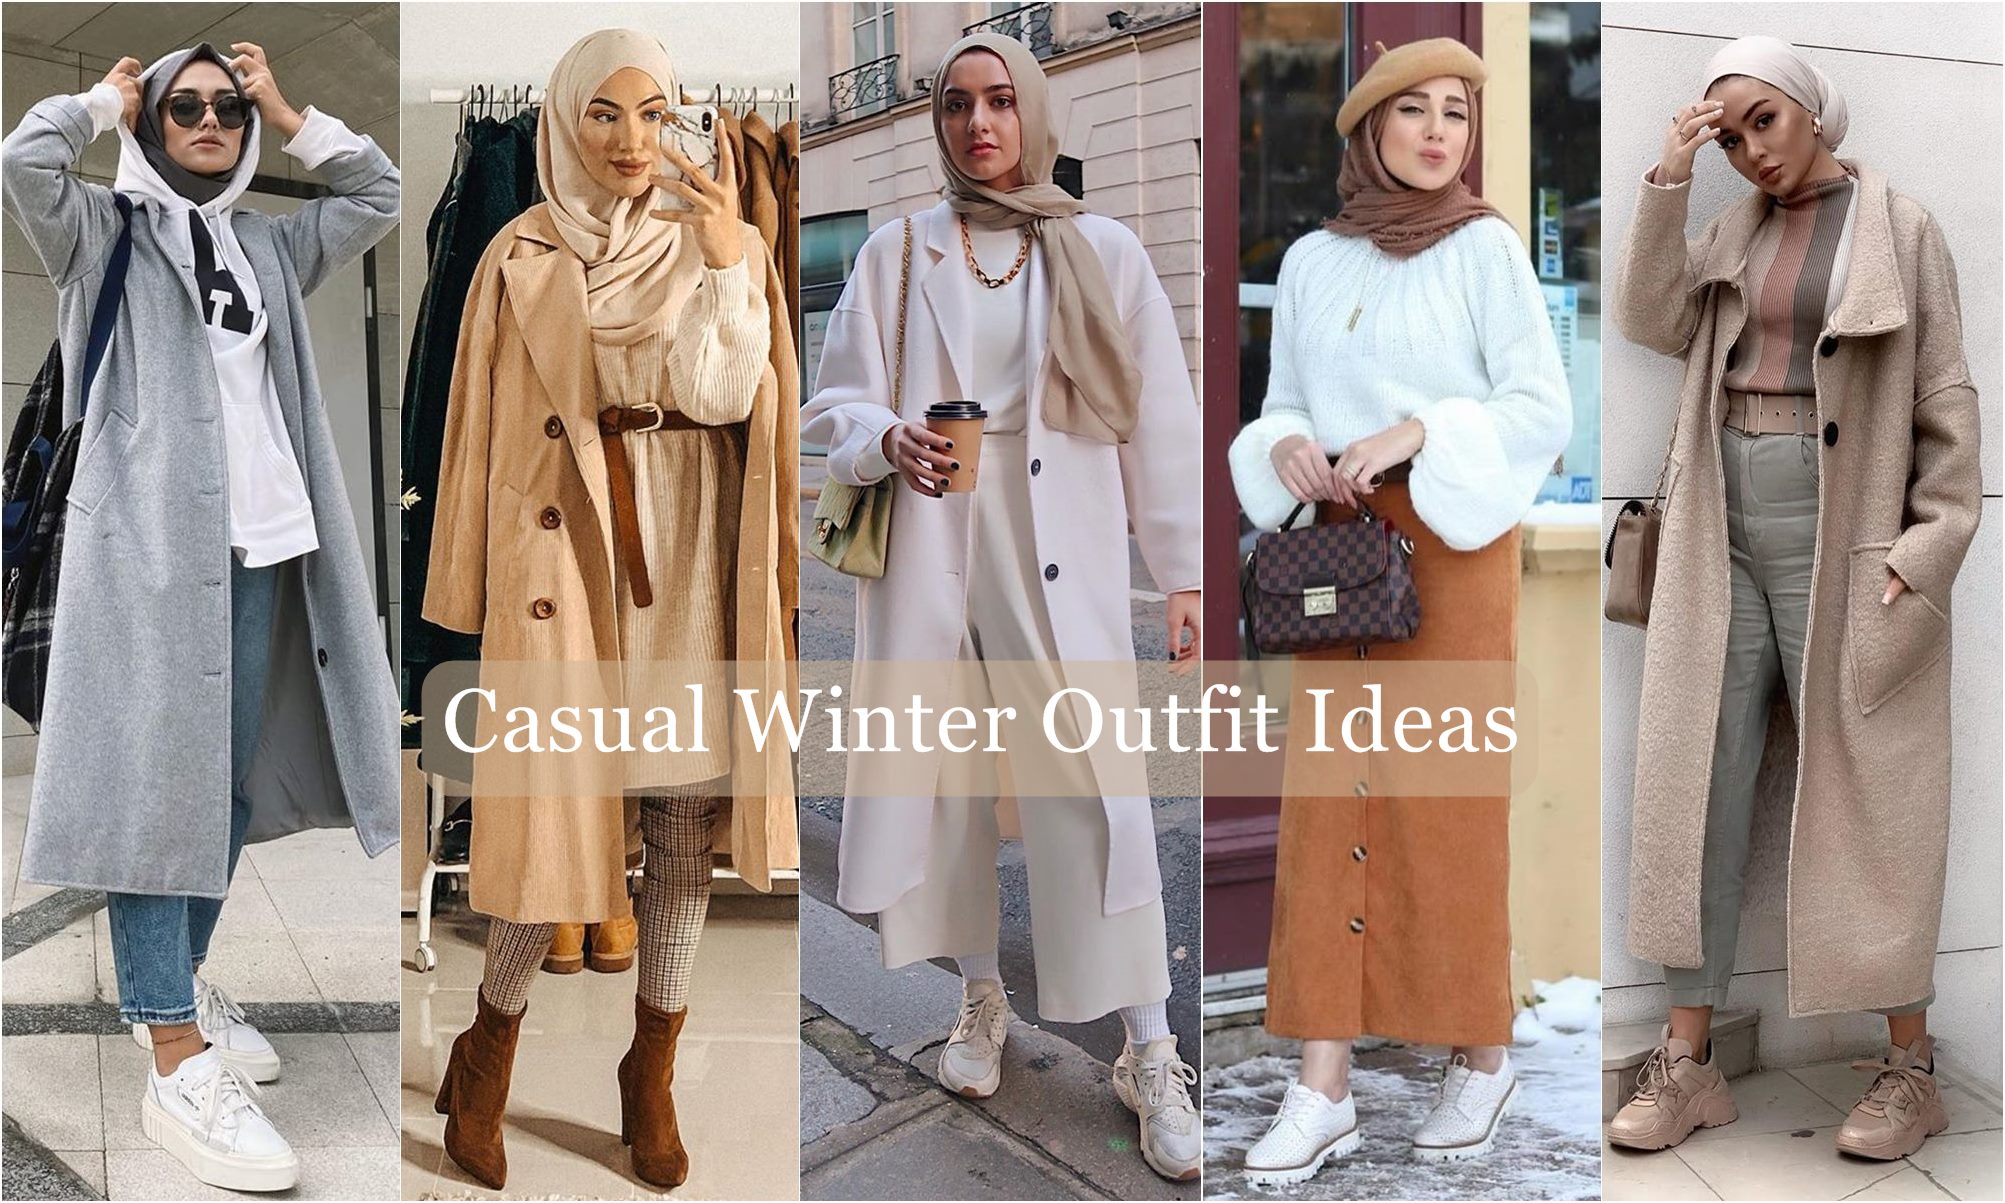 20 Casual Winter Outfit Ideas - Hijab ...